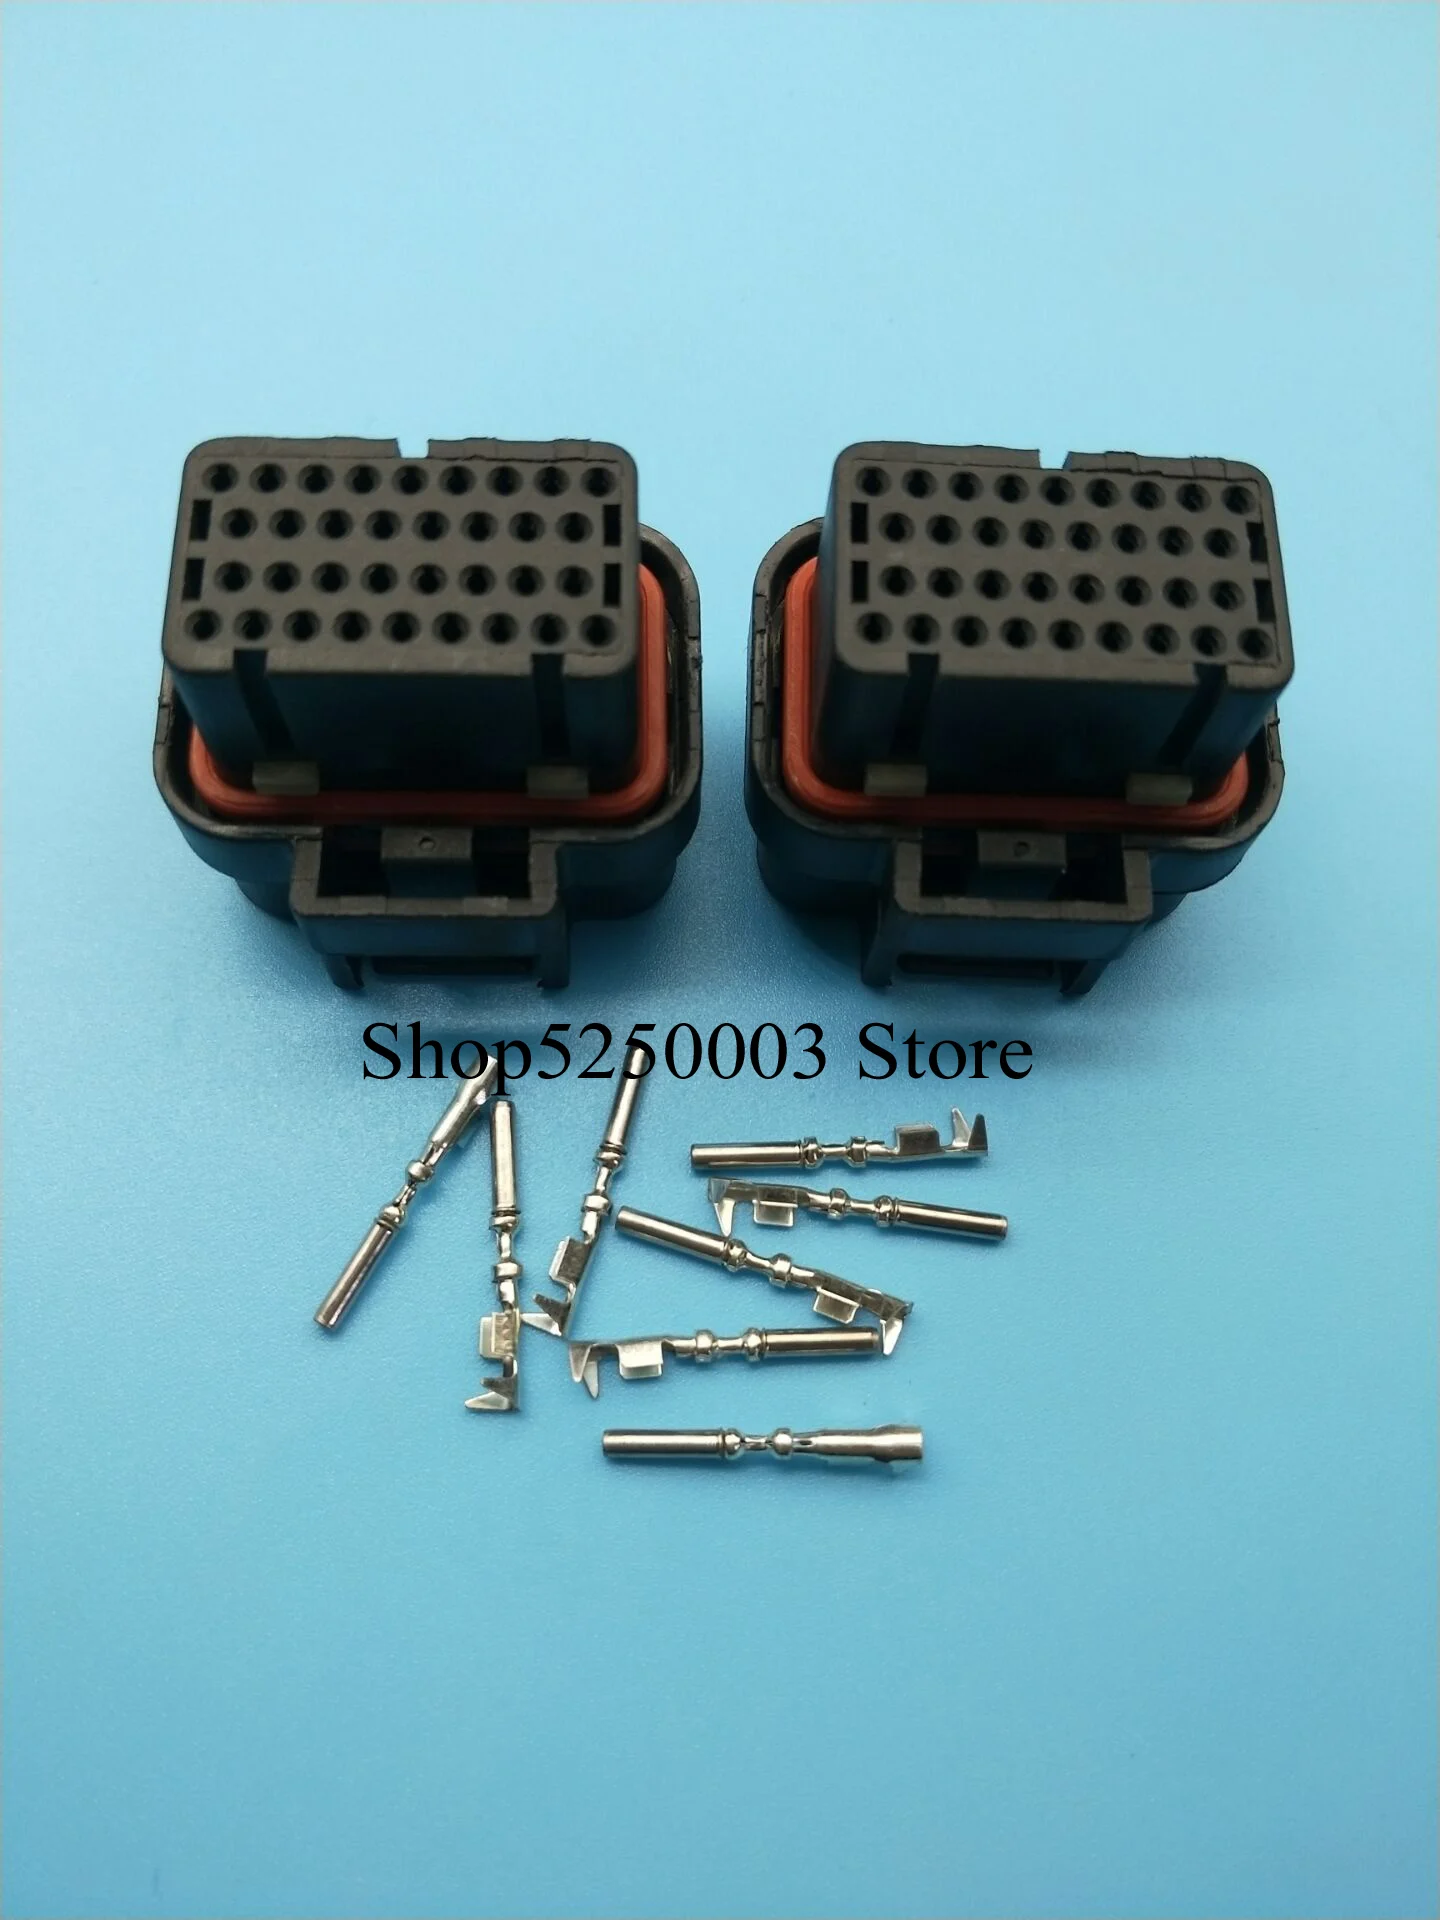 

2/5/10/20 pcs/lots 4-1437290-0 high quality tyco 34 pin female TE CONNECTIVITY automotive wire harness ECU connector